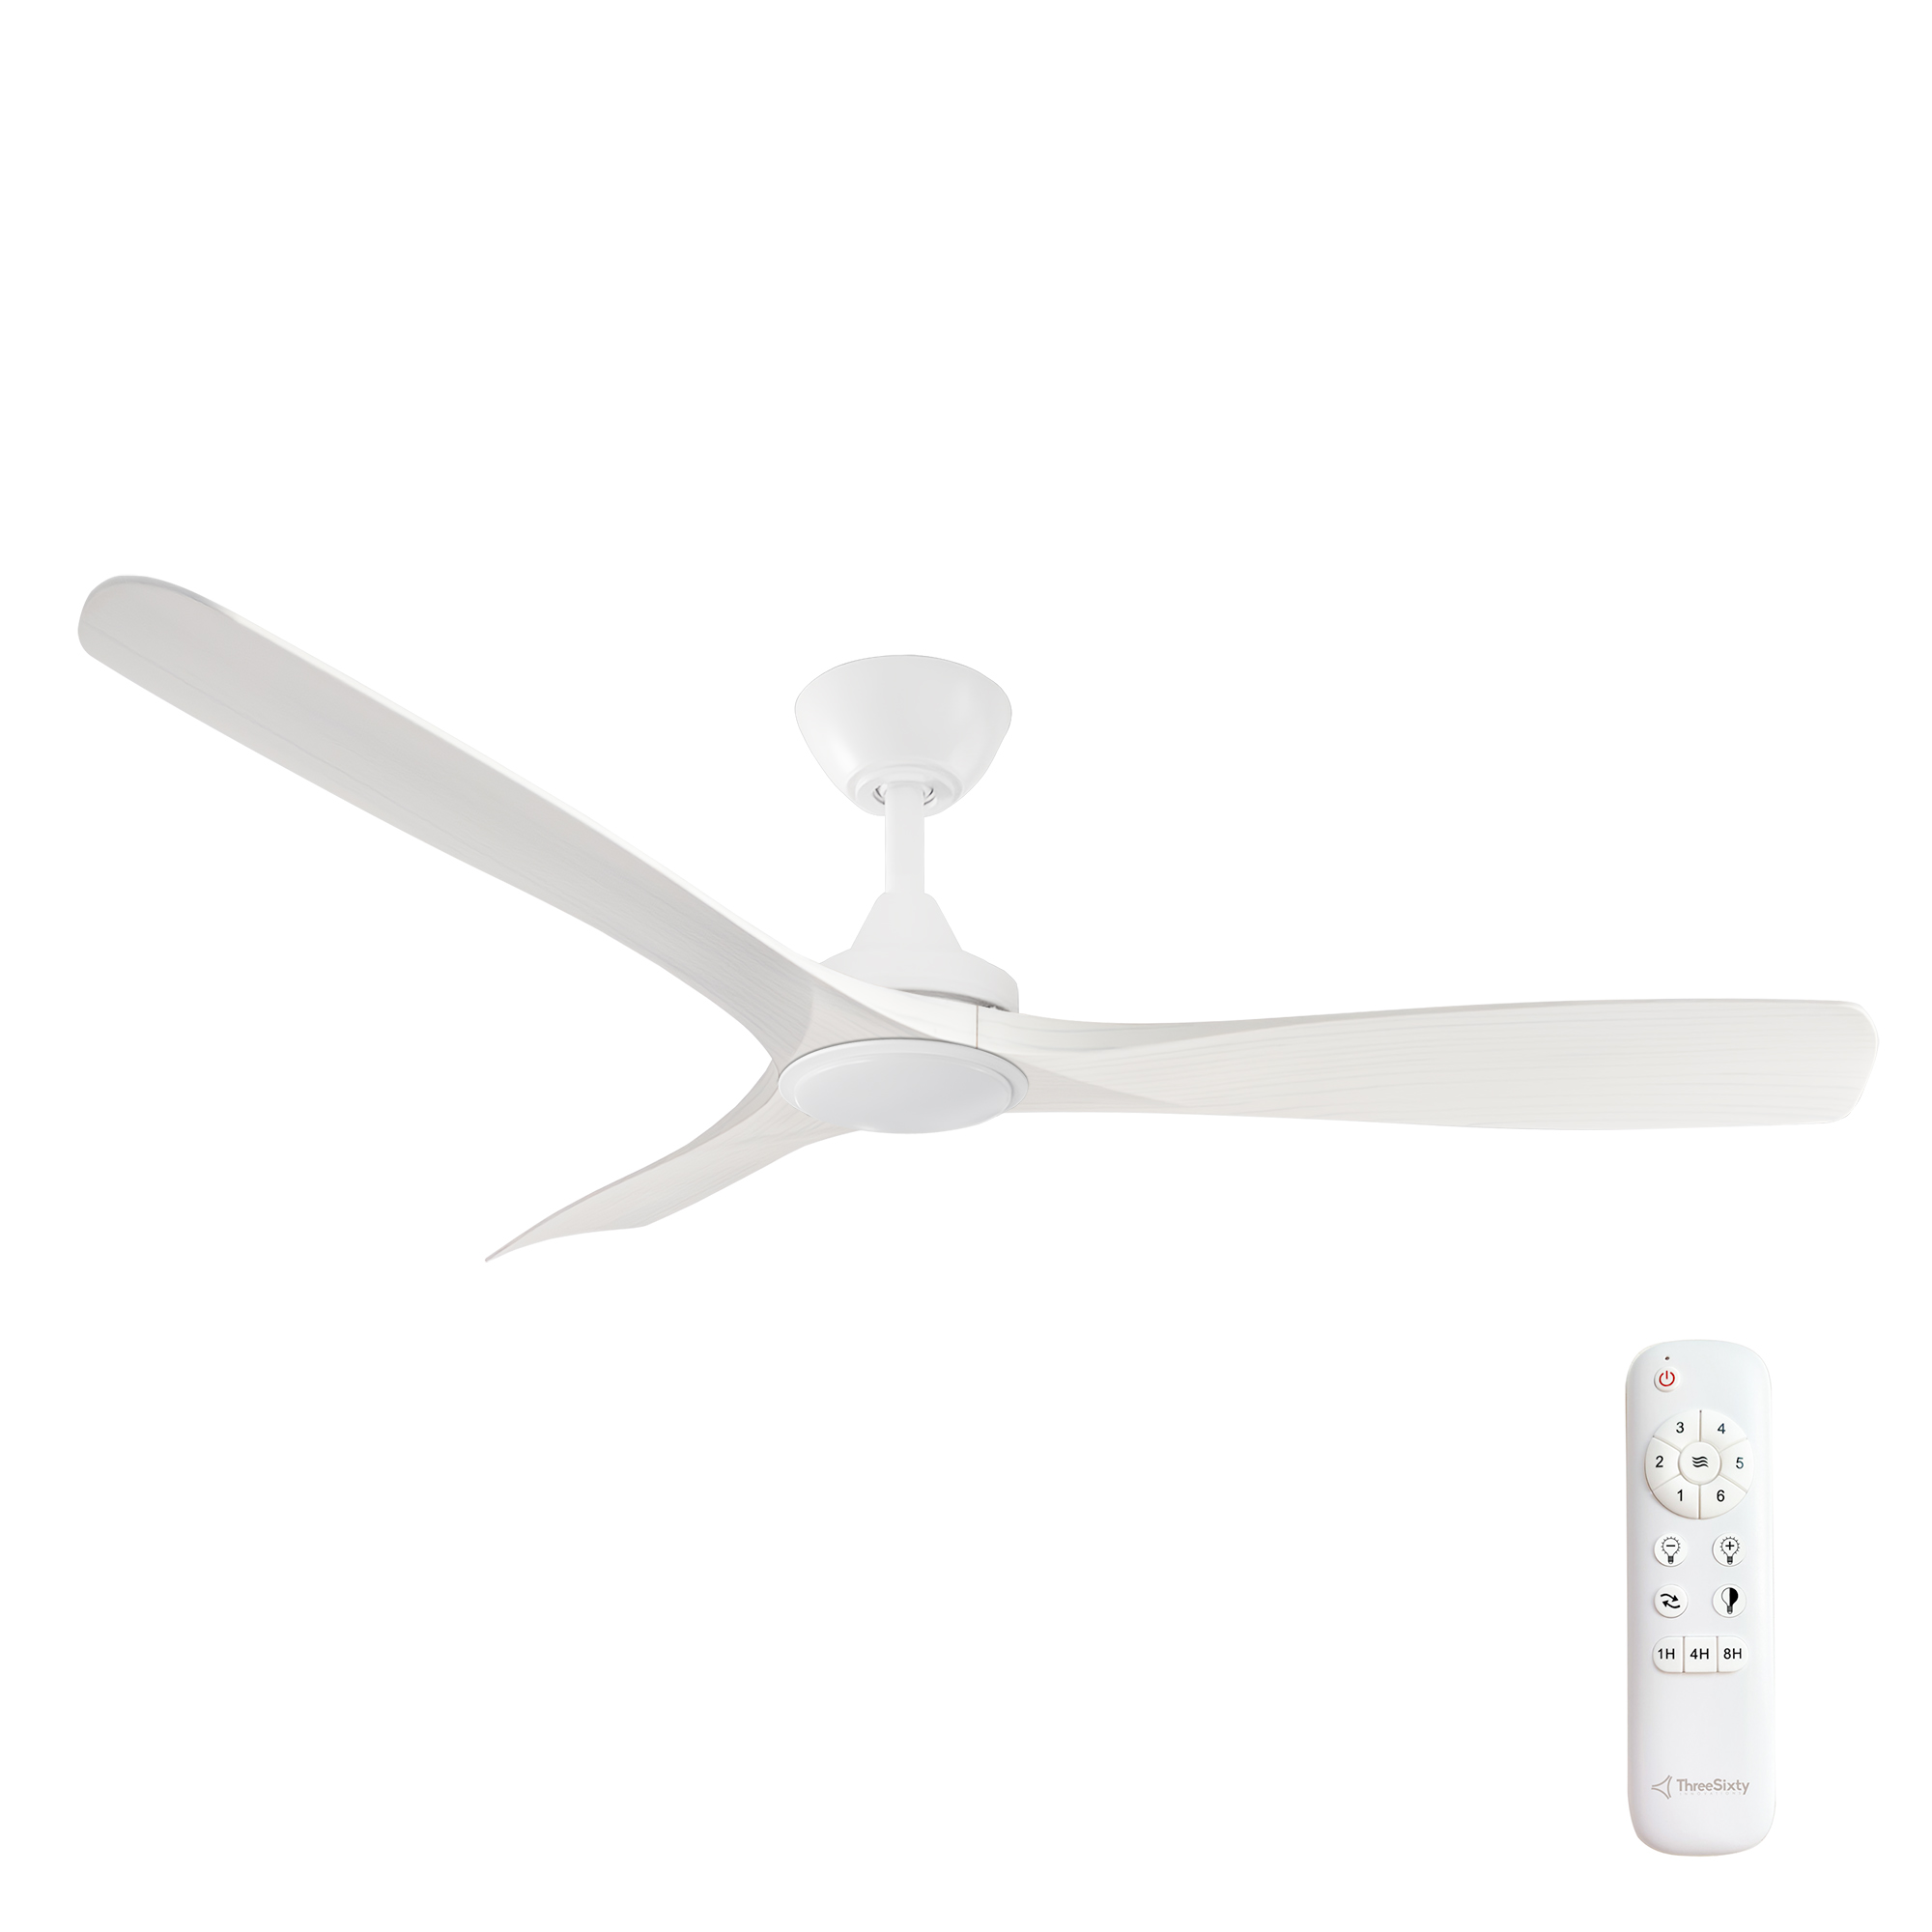 52" Spitfire DC Ceiling Fan in Matte White with White Wash blades and 18W CCT LED Light